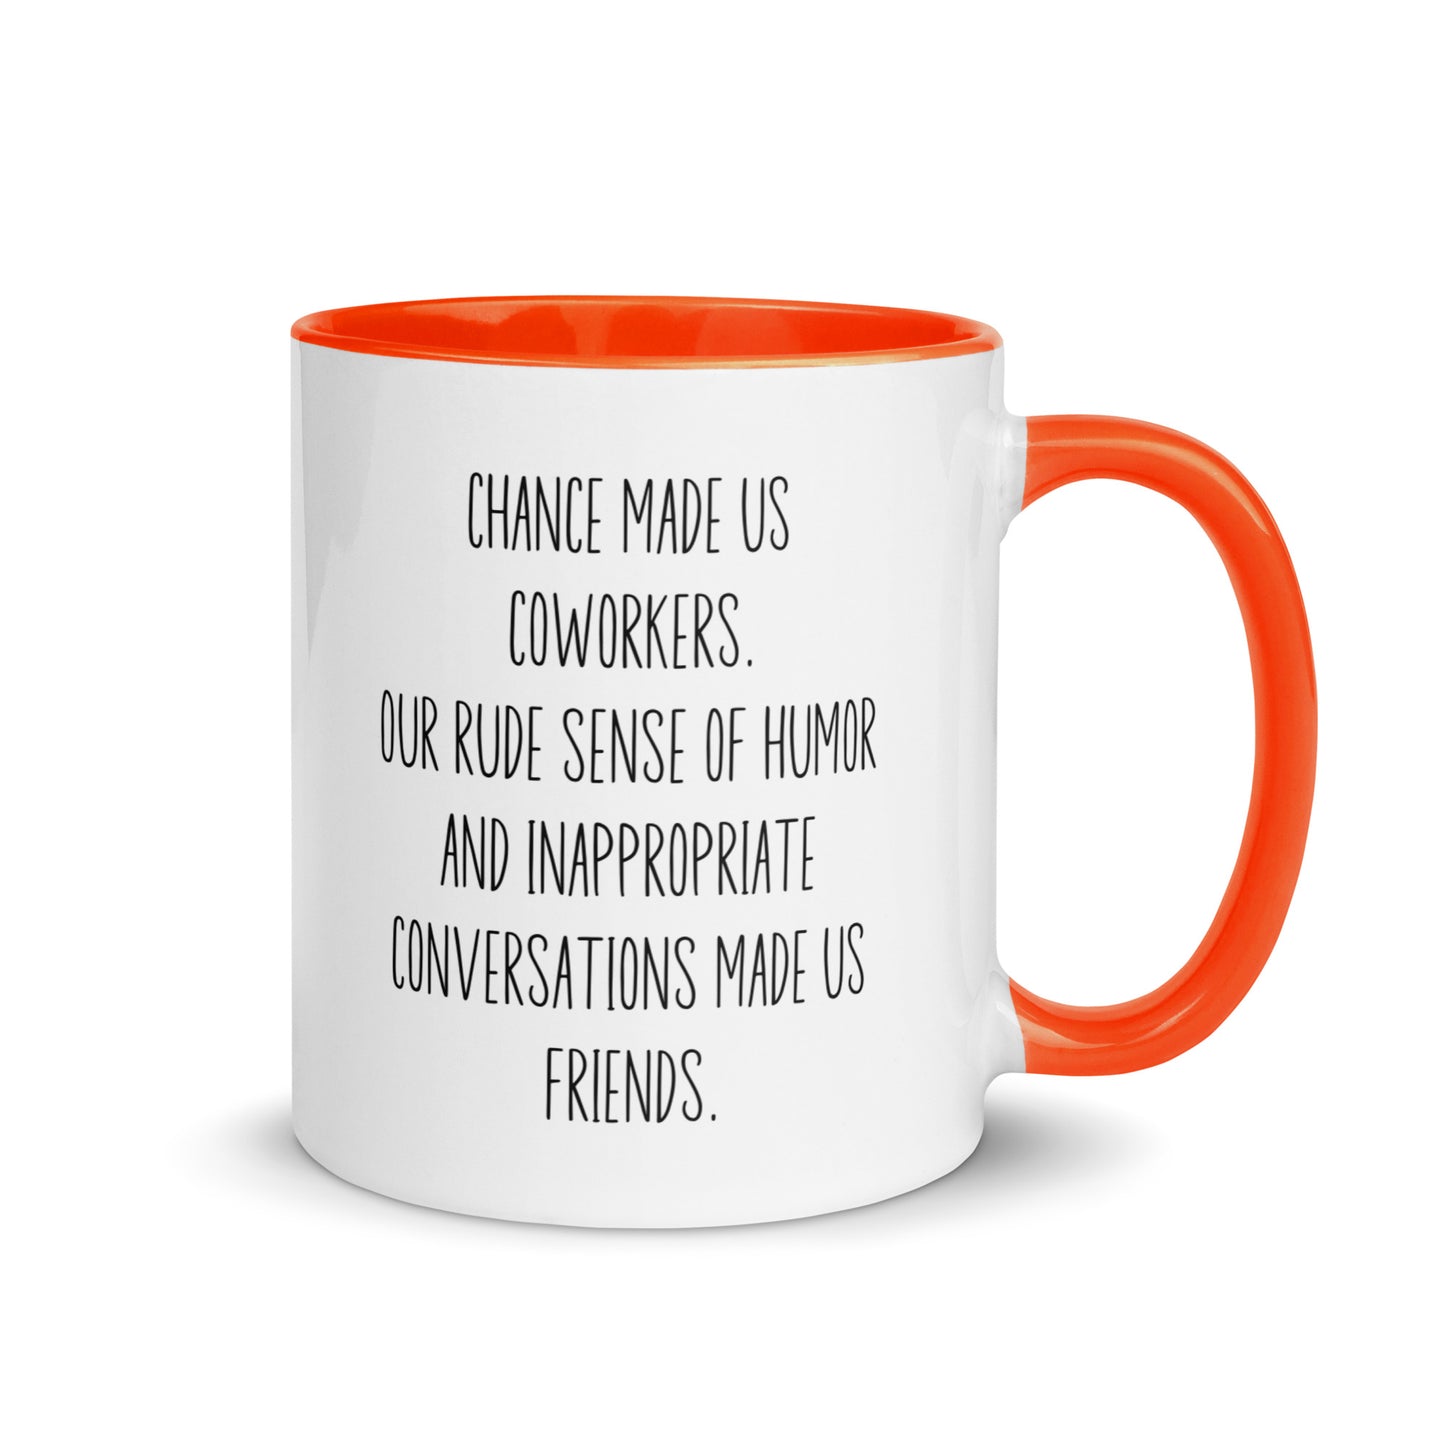 Chance Made us Coworkers and Inappropriateness Made us Friends Mug